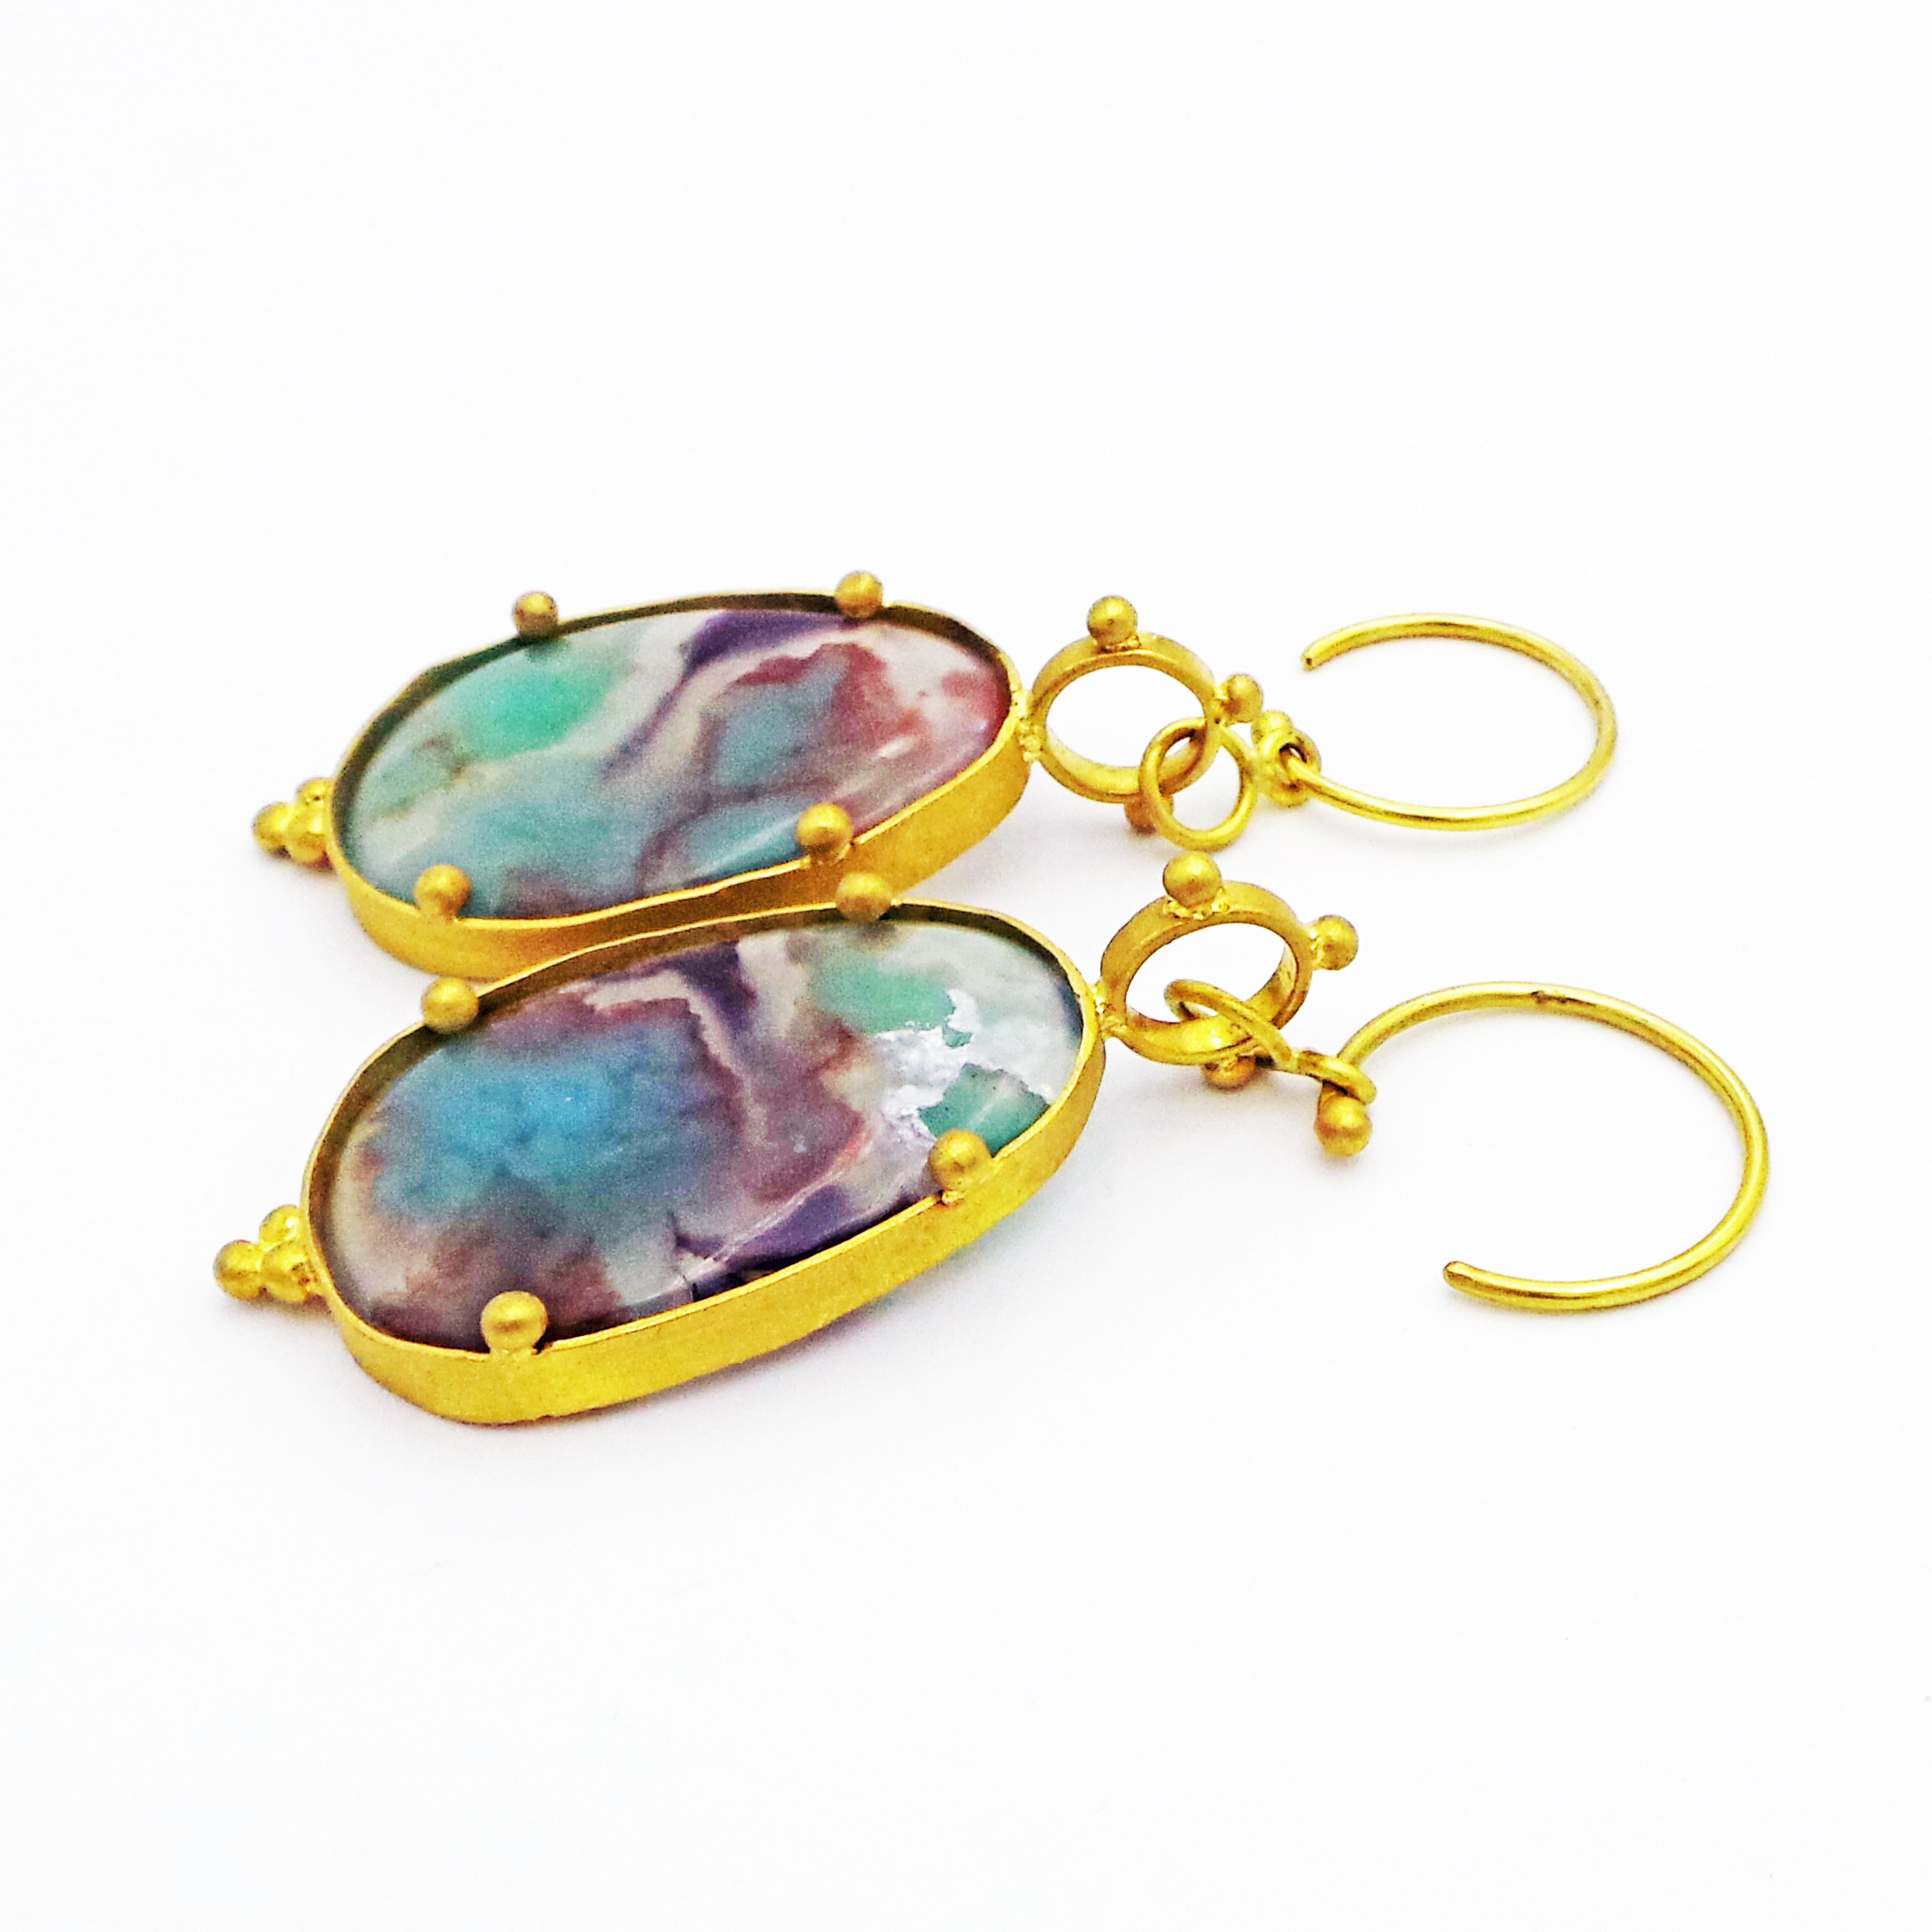 Beautiful Aquaprase and hand-forged 22k yellow gold dangle earrings. Circle hoops come with silicone backs for added comfort, support and security. Aquaprase is one of the most recently discovered gemstones, being unearthed in 2014 by a gem explorer